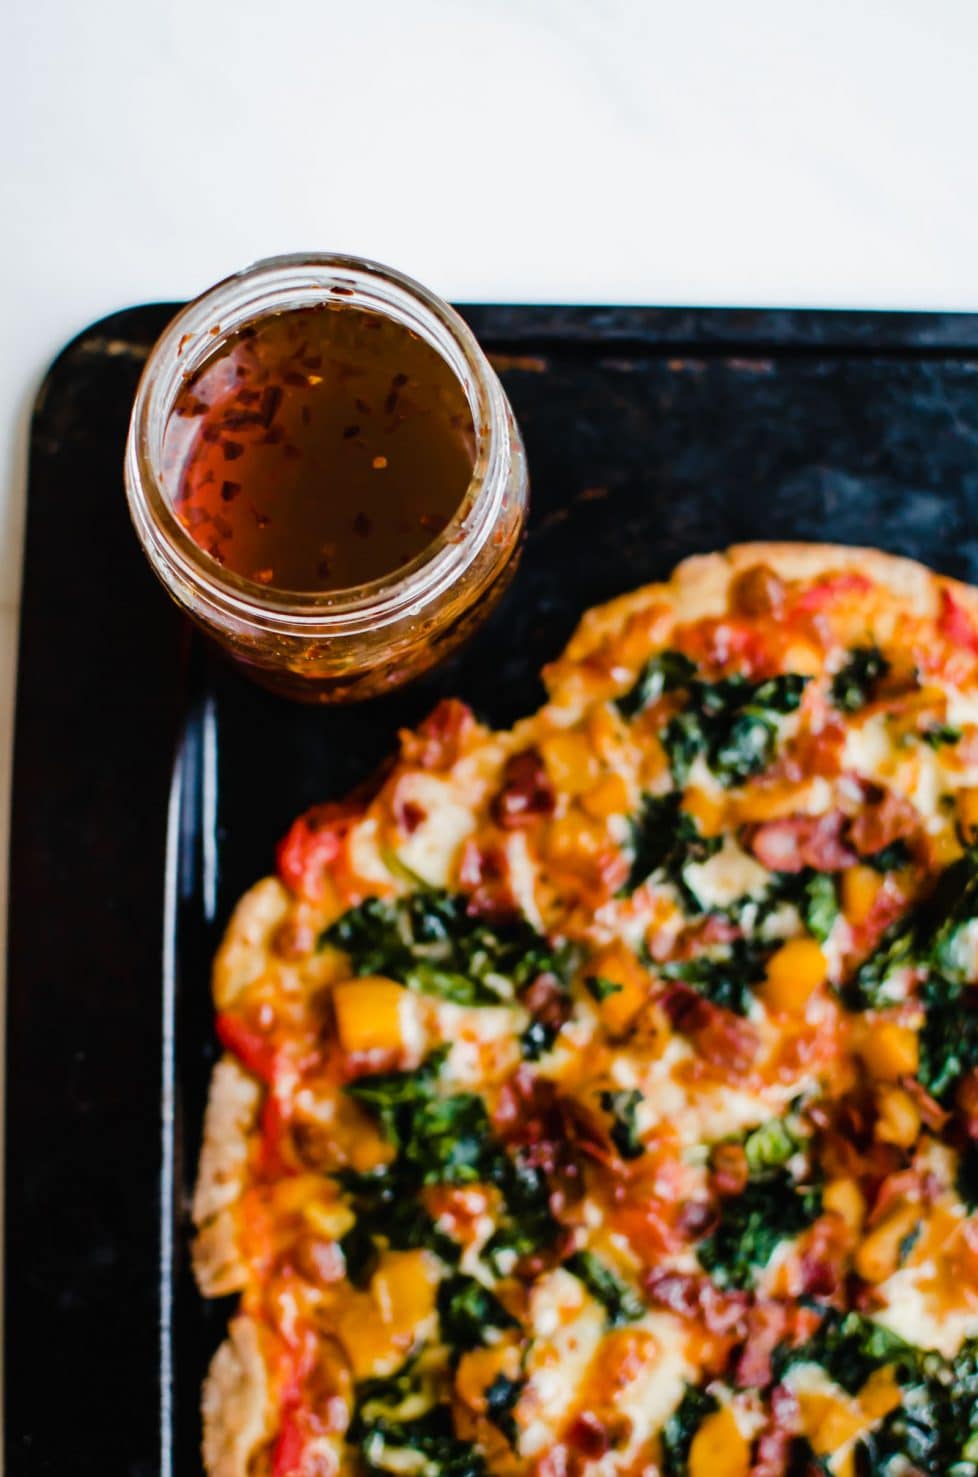 Kale bacon pizza with hot drizzle honey.